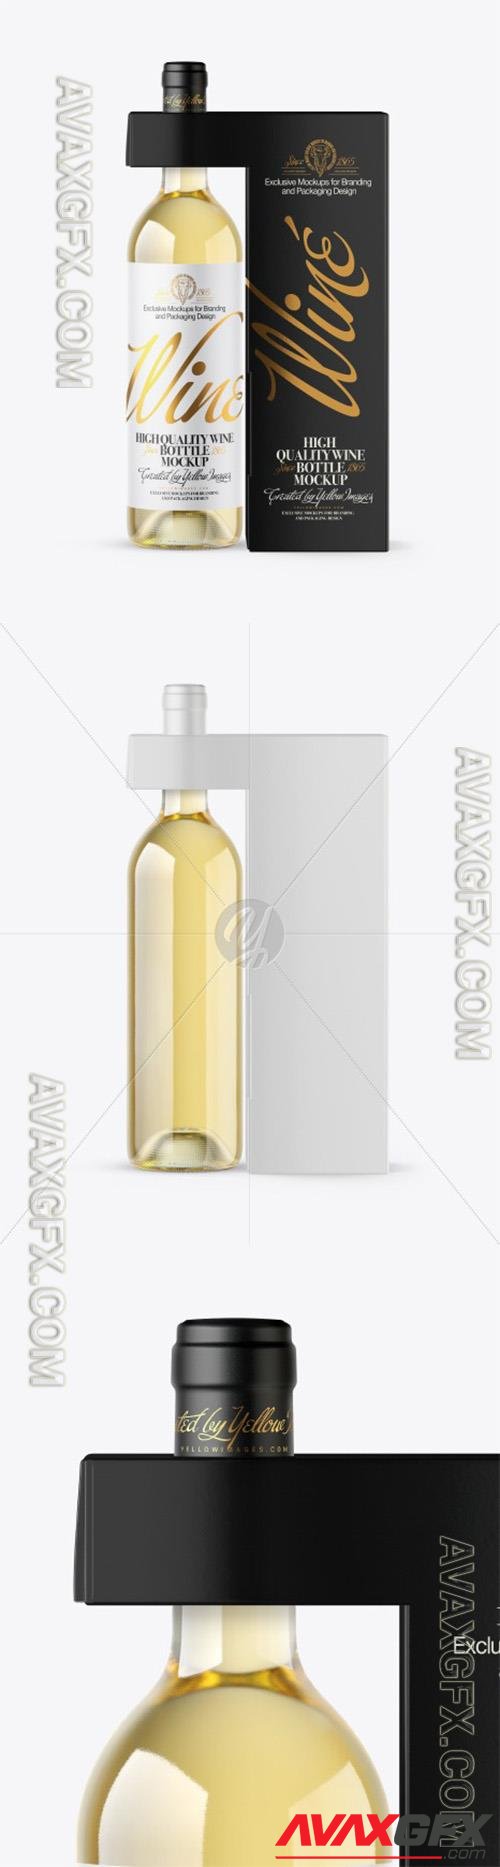 Clear Glass White Wine Bottle with Box Mockup 50985 TIF